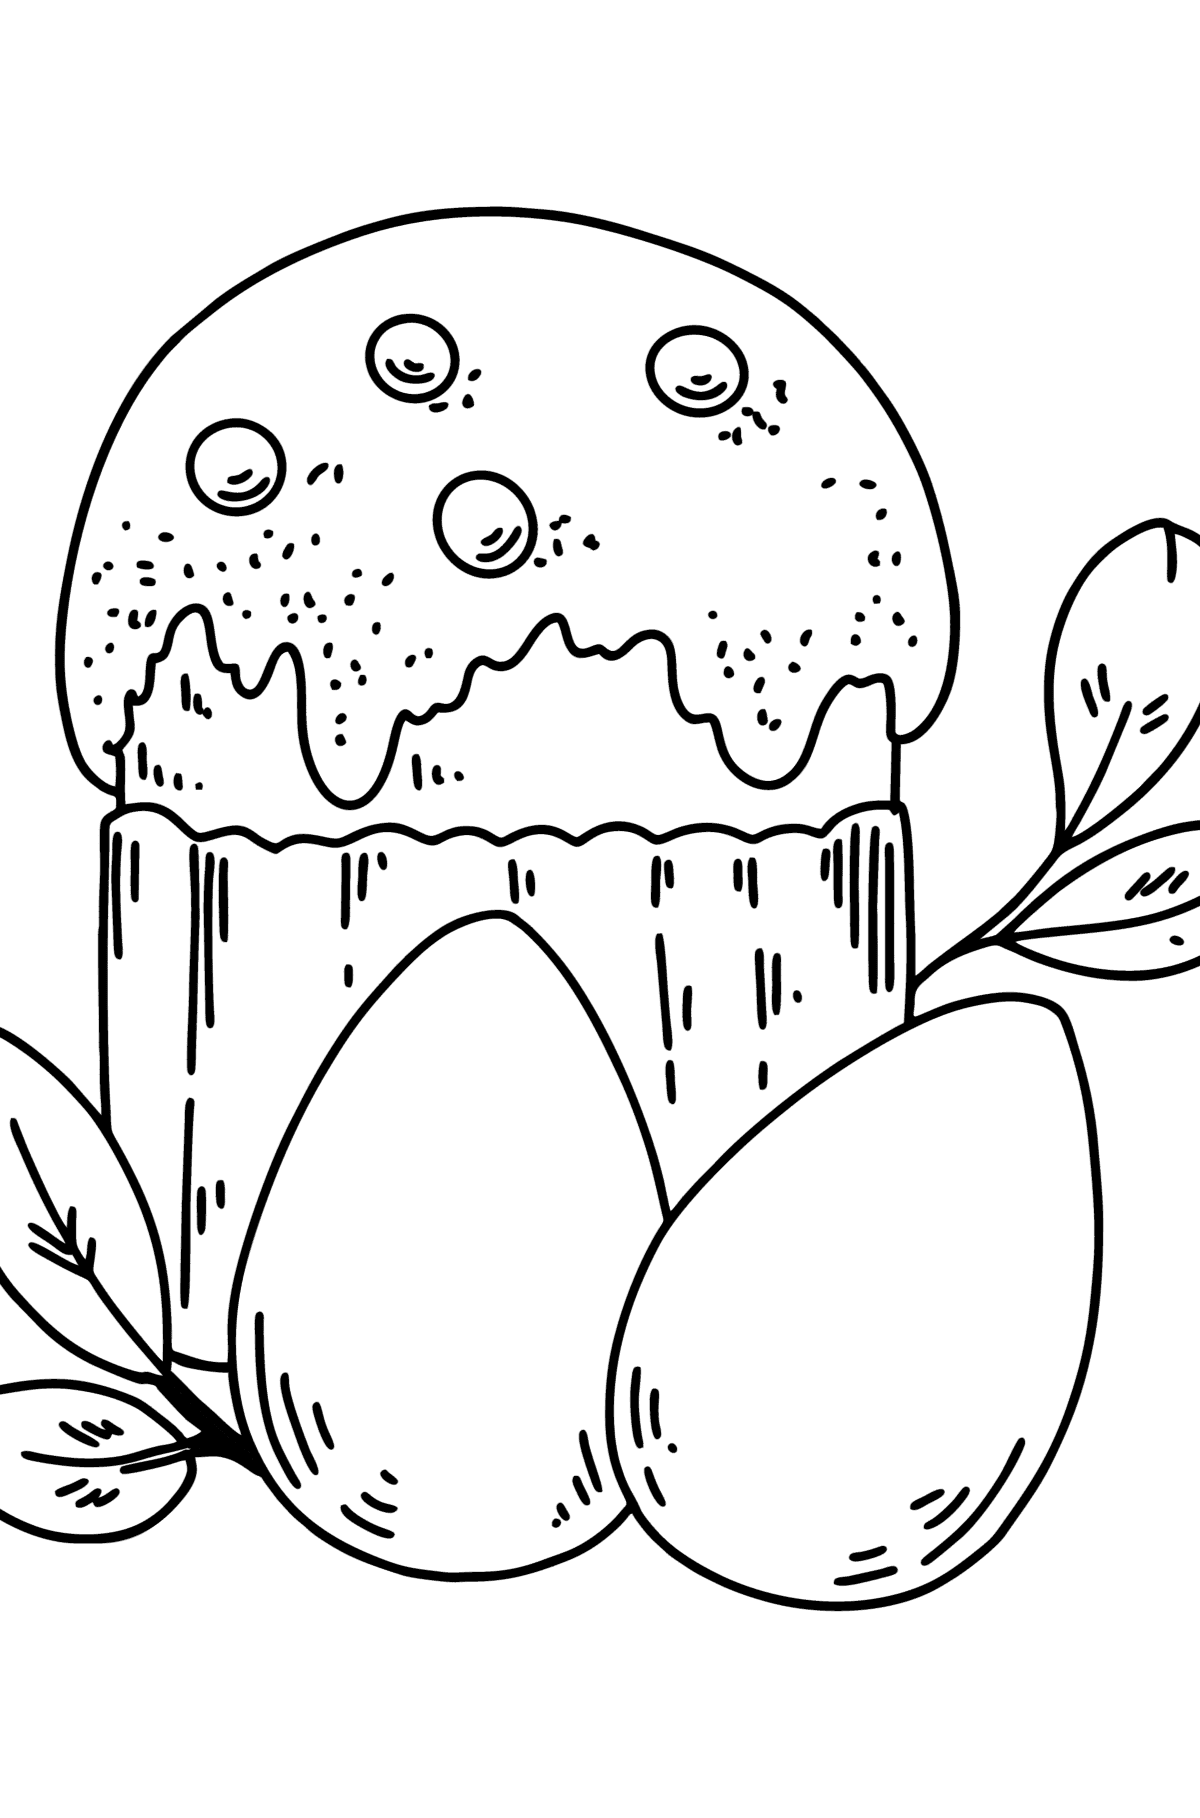 Coloring page - Easter cake and Painted Eggs - Coloring Pages for Kids